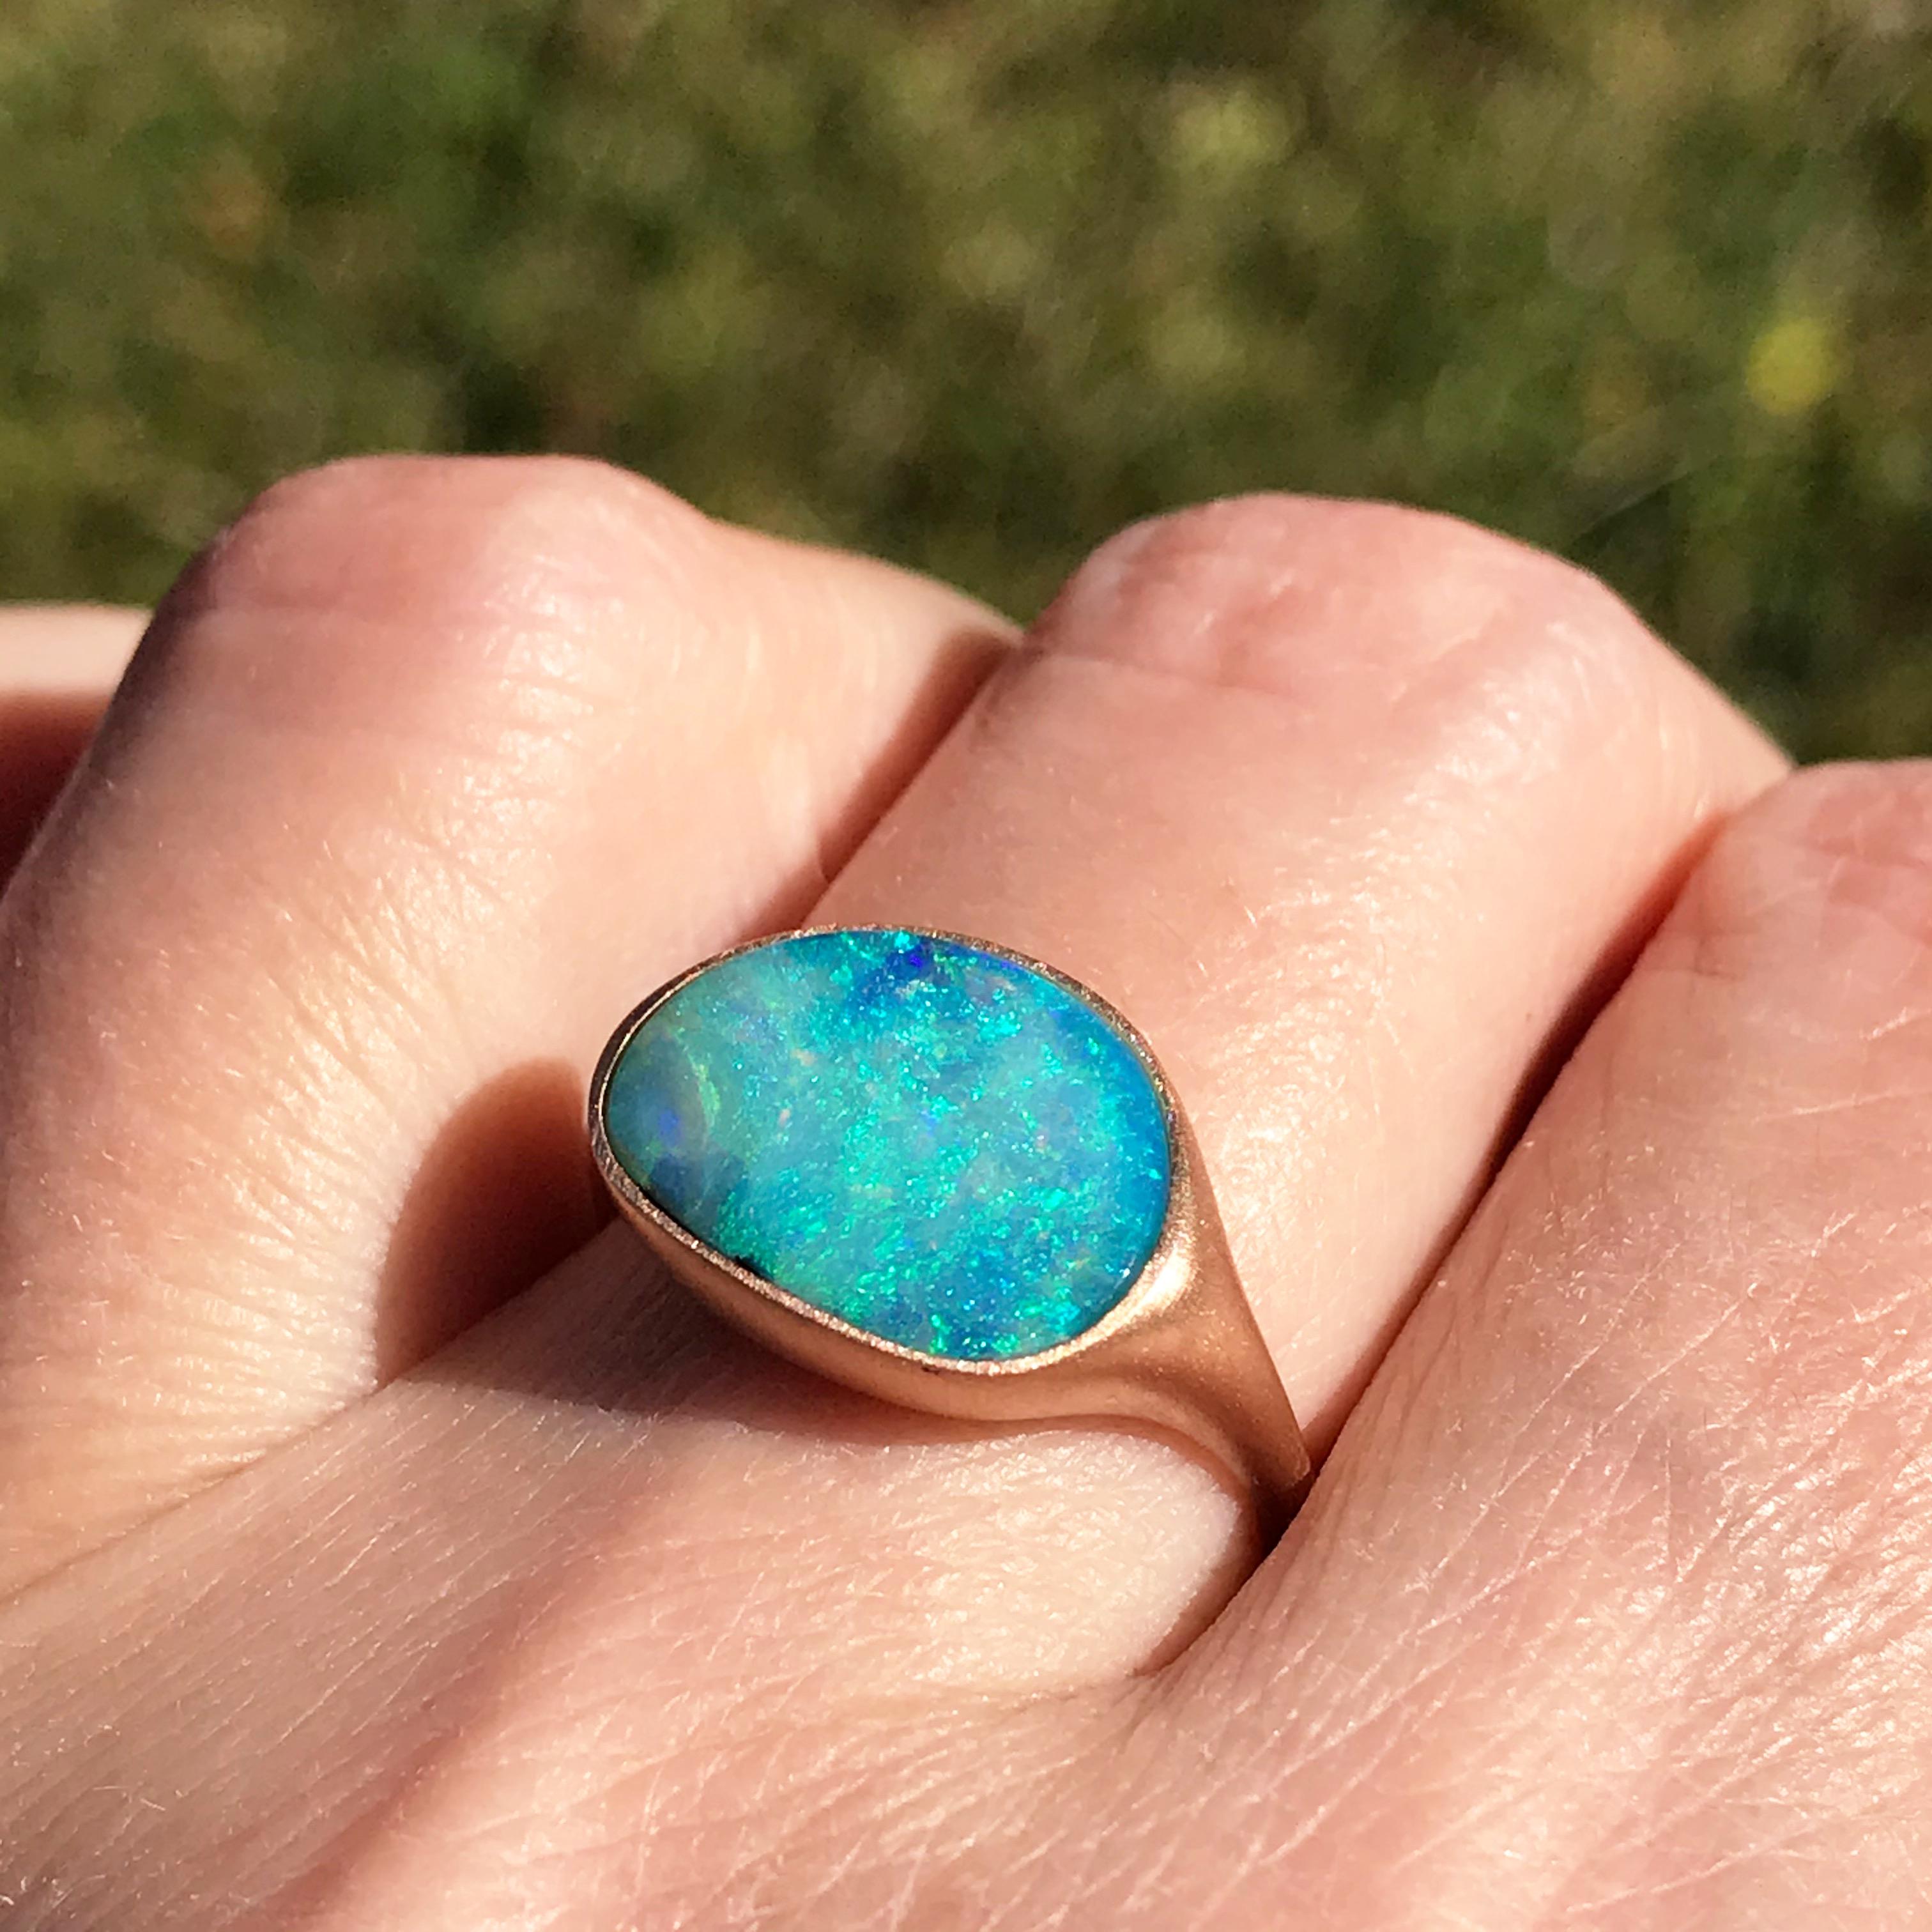 Dalben design One of a kind 18 kt rose gold satin finishing ring with a 3,93 carat bezel-set Australian Boulder Opal .  
The stone has deep light blue colors with green light spots.
Ring size 6 3/4 - EU 54 re-sizable to most finger sizes.  
Bezel